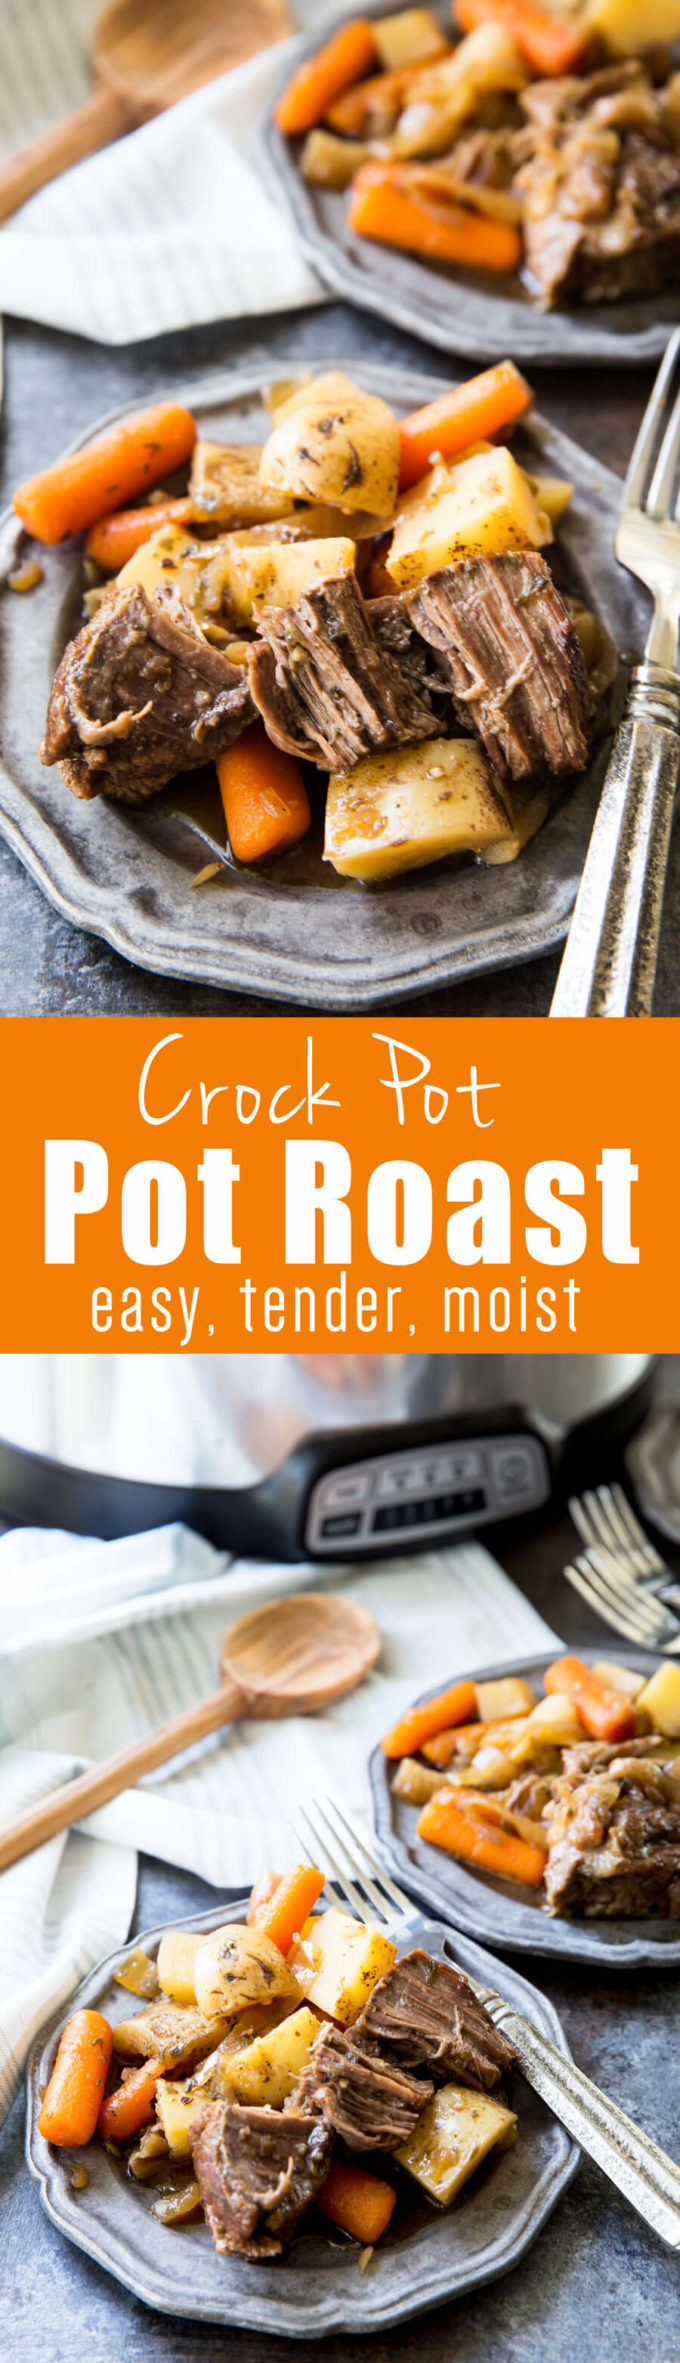 Crock Pot Roast: This is such an easy and tasty pot roast; it is fall apart tender, juicy, moist, flavorful, and the perfect Sunday dinner meal. You can't go wrong with this recipe!